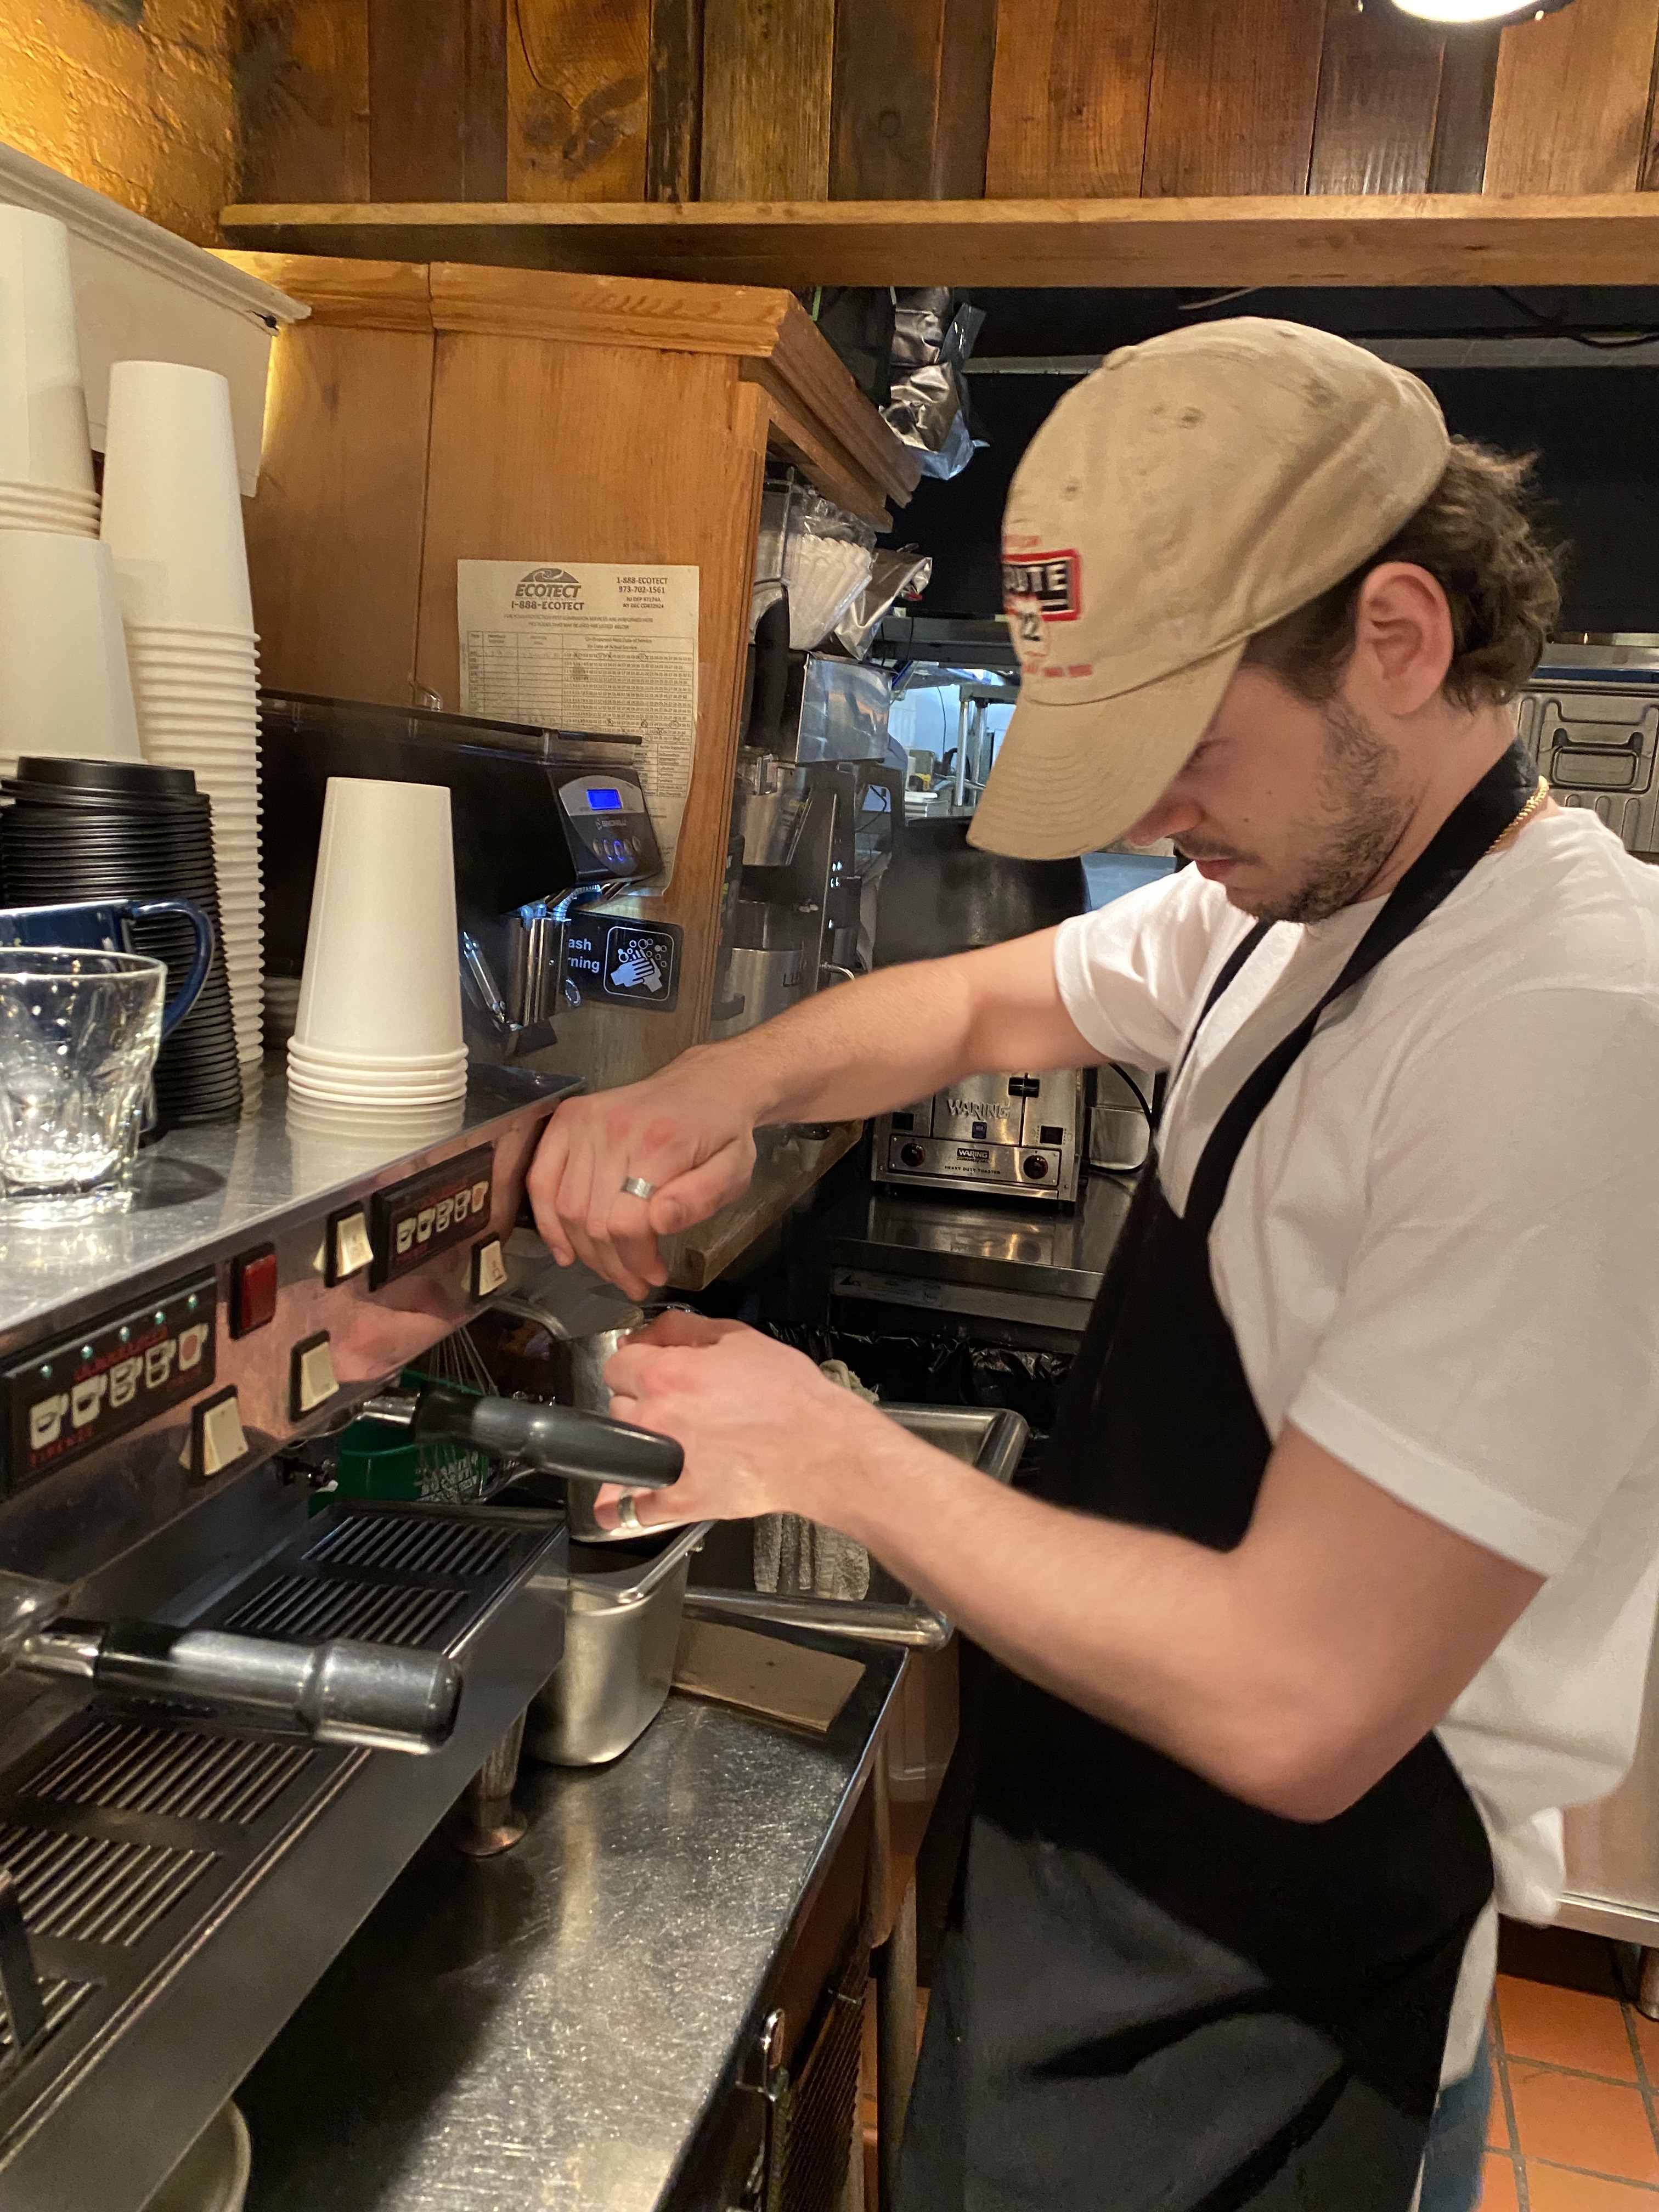 11th St. Cafe - Enzo making latte